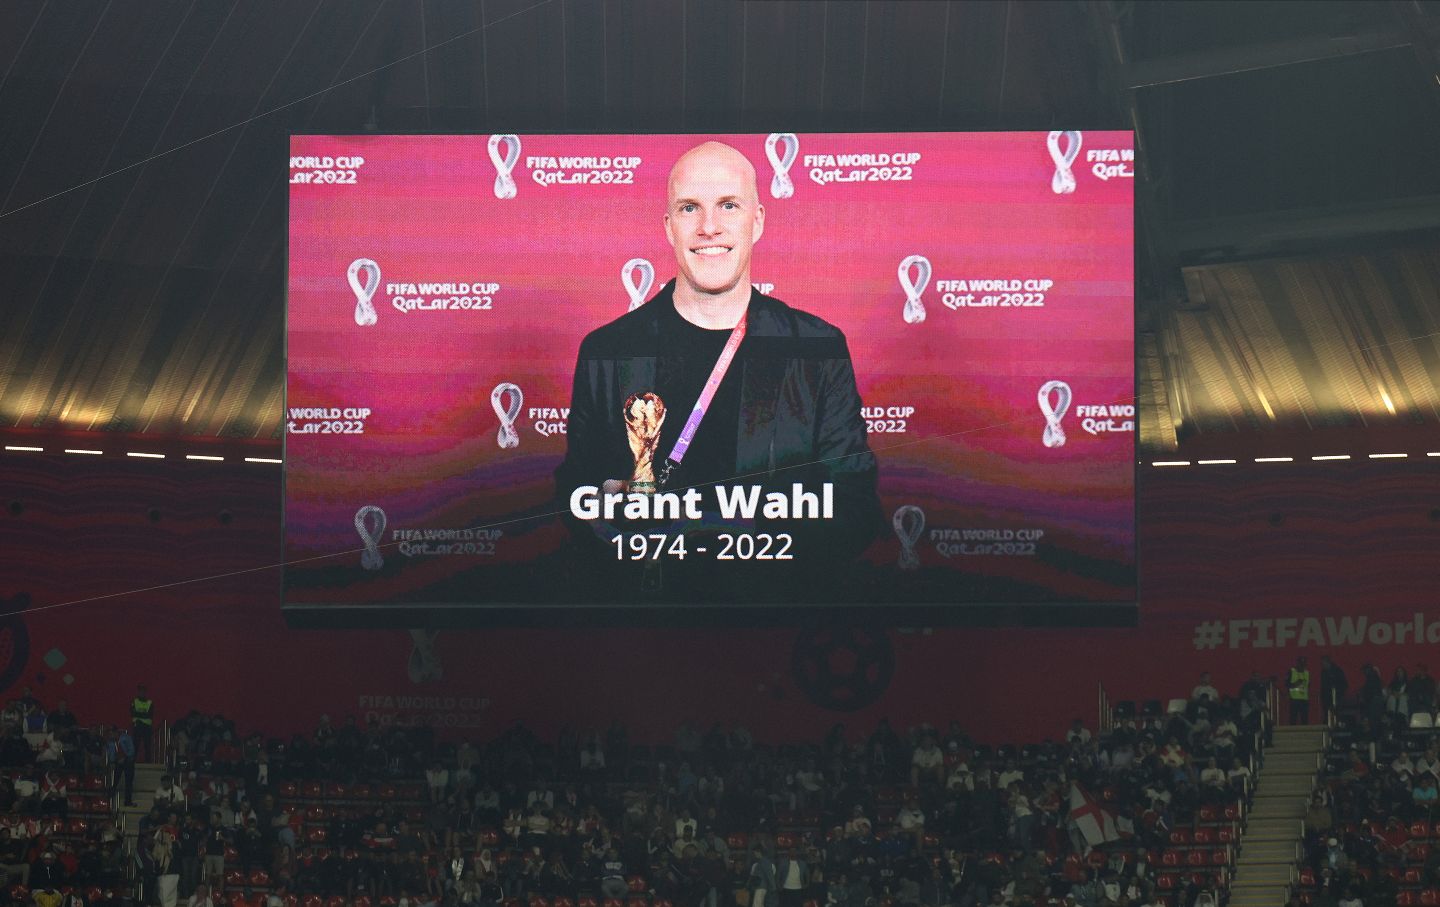 A picture of US journalist Grant Wahl projected on screen announcing his death during the England versus France World Cup quarter final match in Al Khor, Qatar.